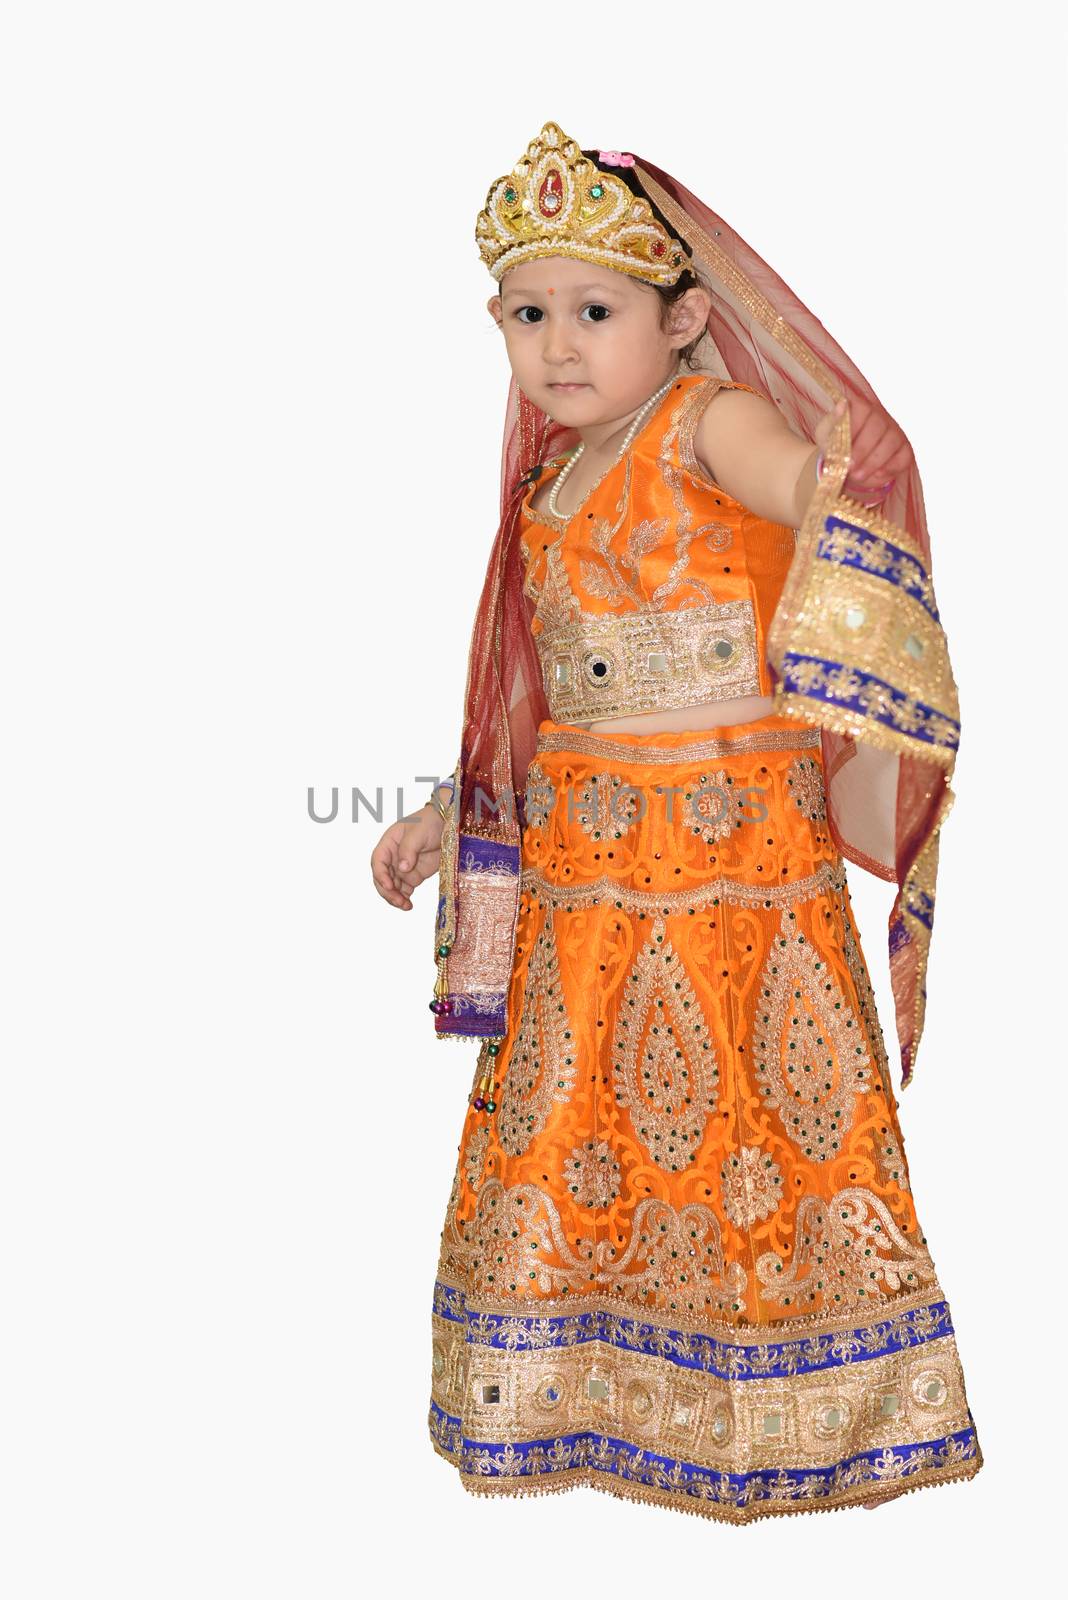 Little girl in Indian traditional dress. by dushi82